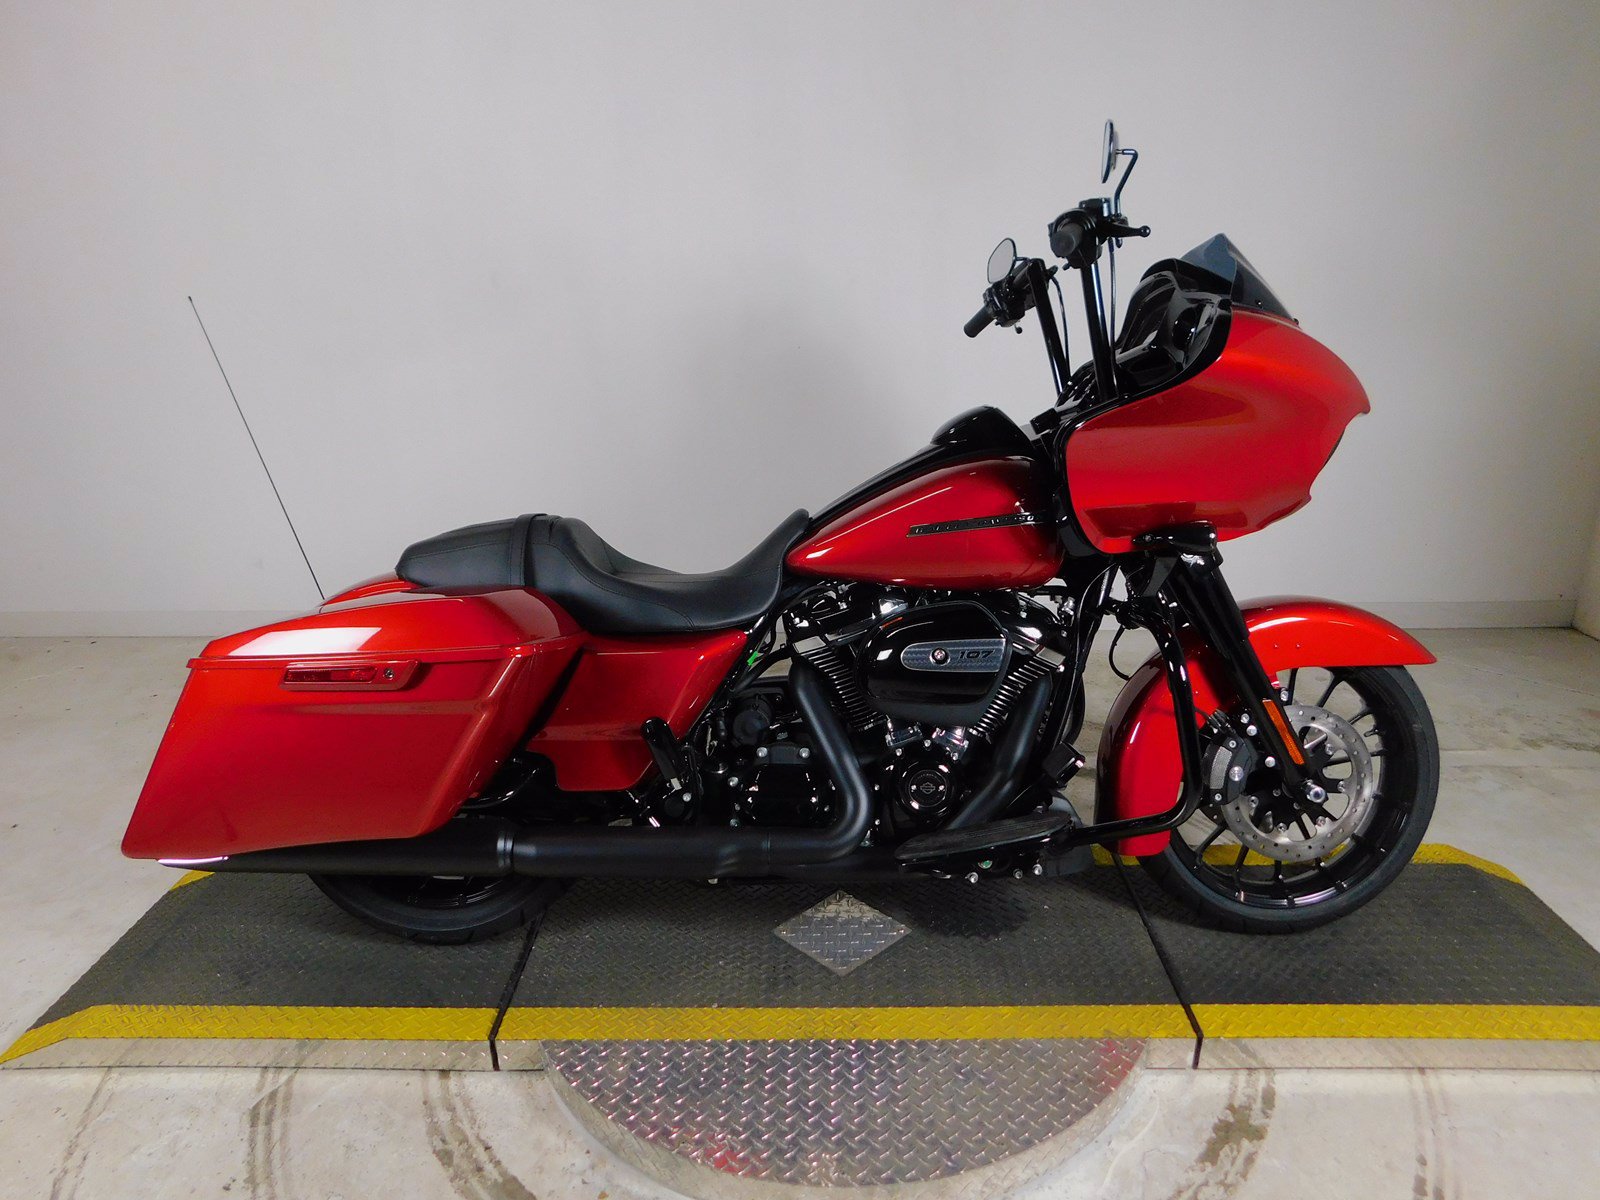 New 2018 Harley-Davidson Road Glide Special FLTRXS Touring ...